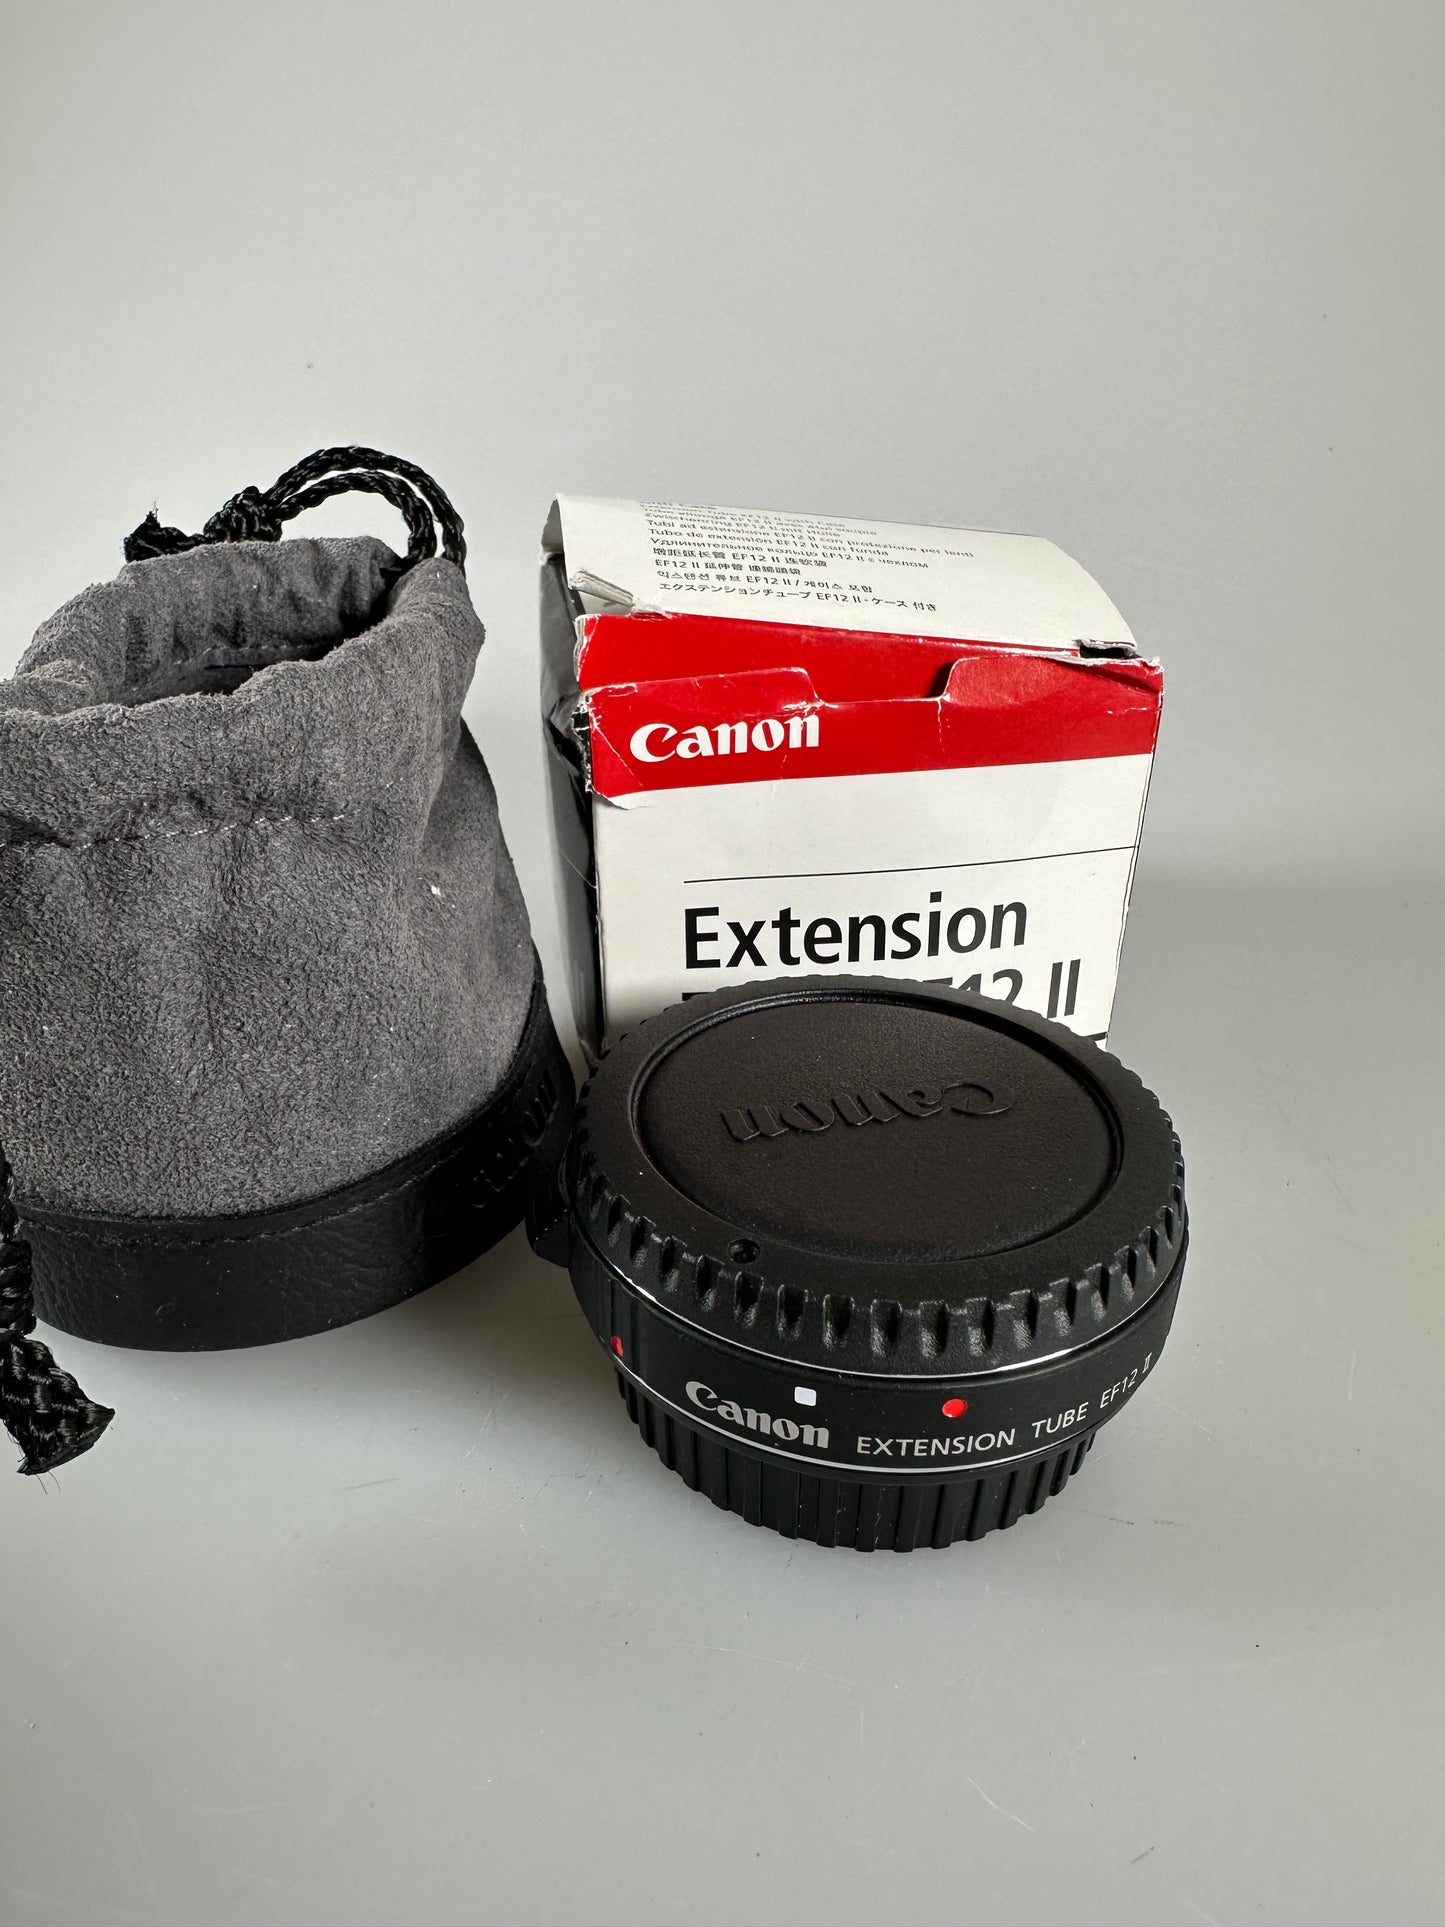 Canon Lens Extension Tube EF12 II